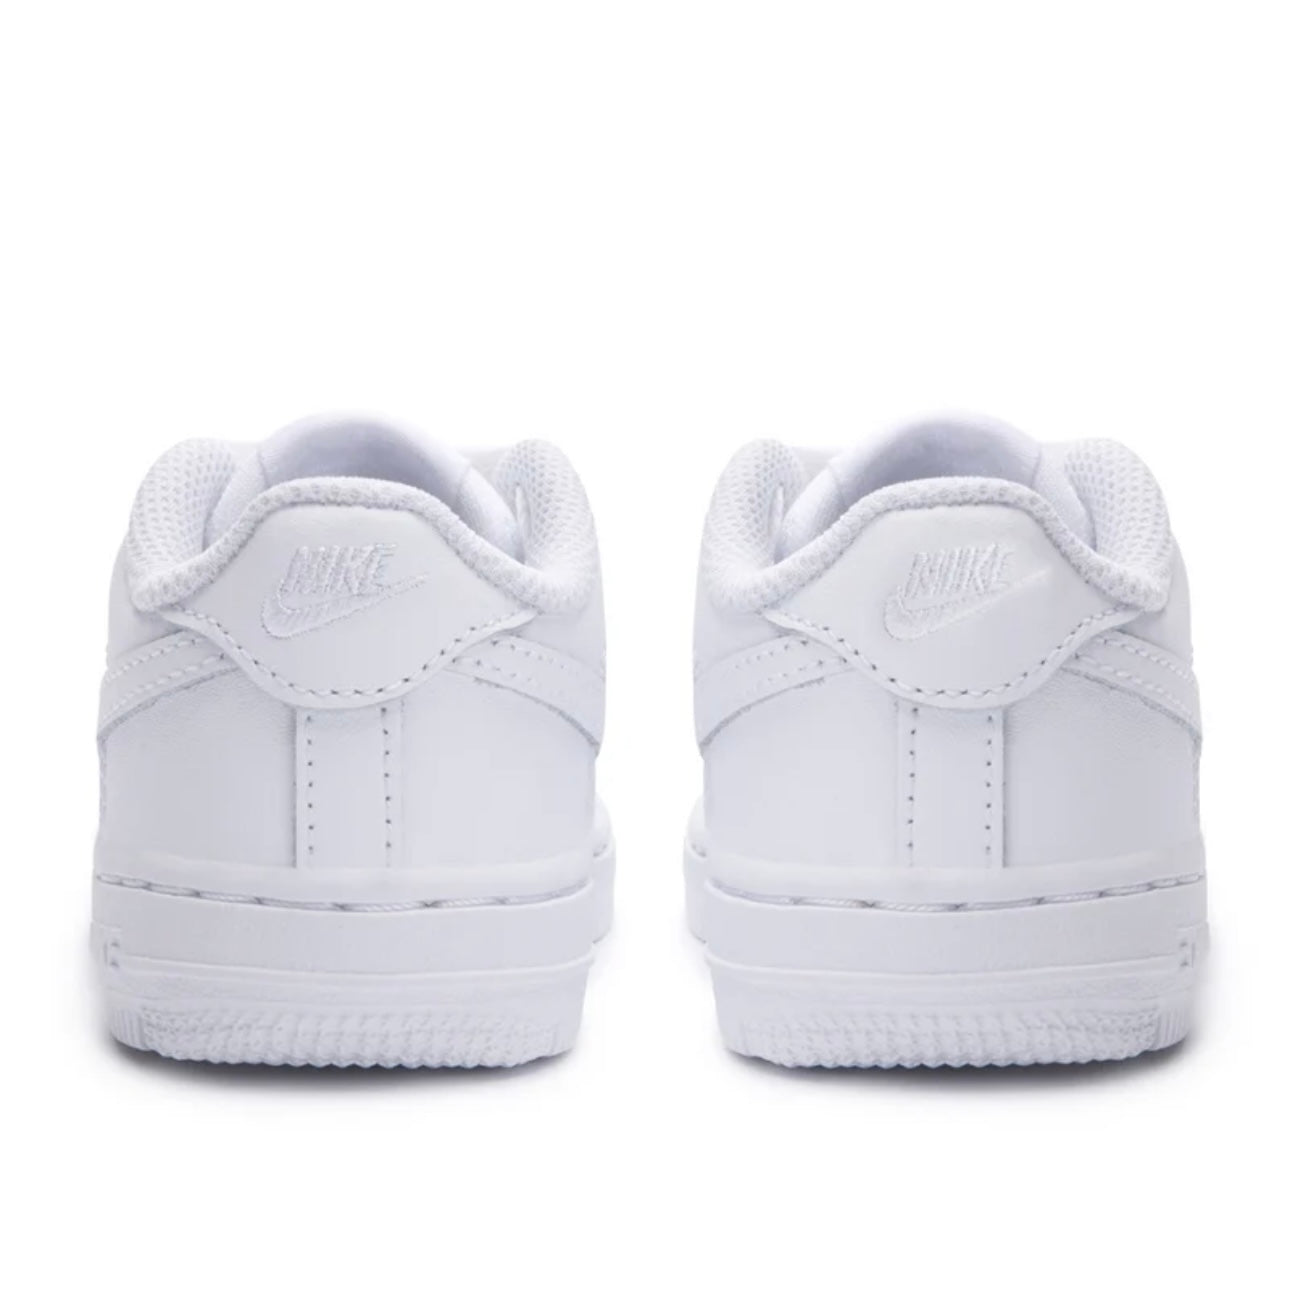 Nike Air Force 1 Low "White On White" sneakers kids